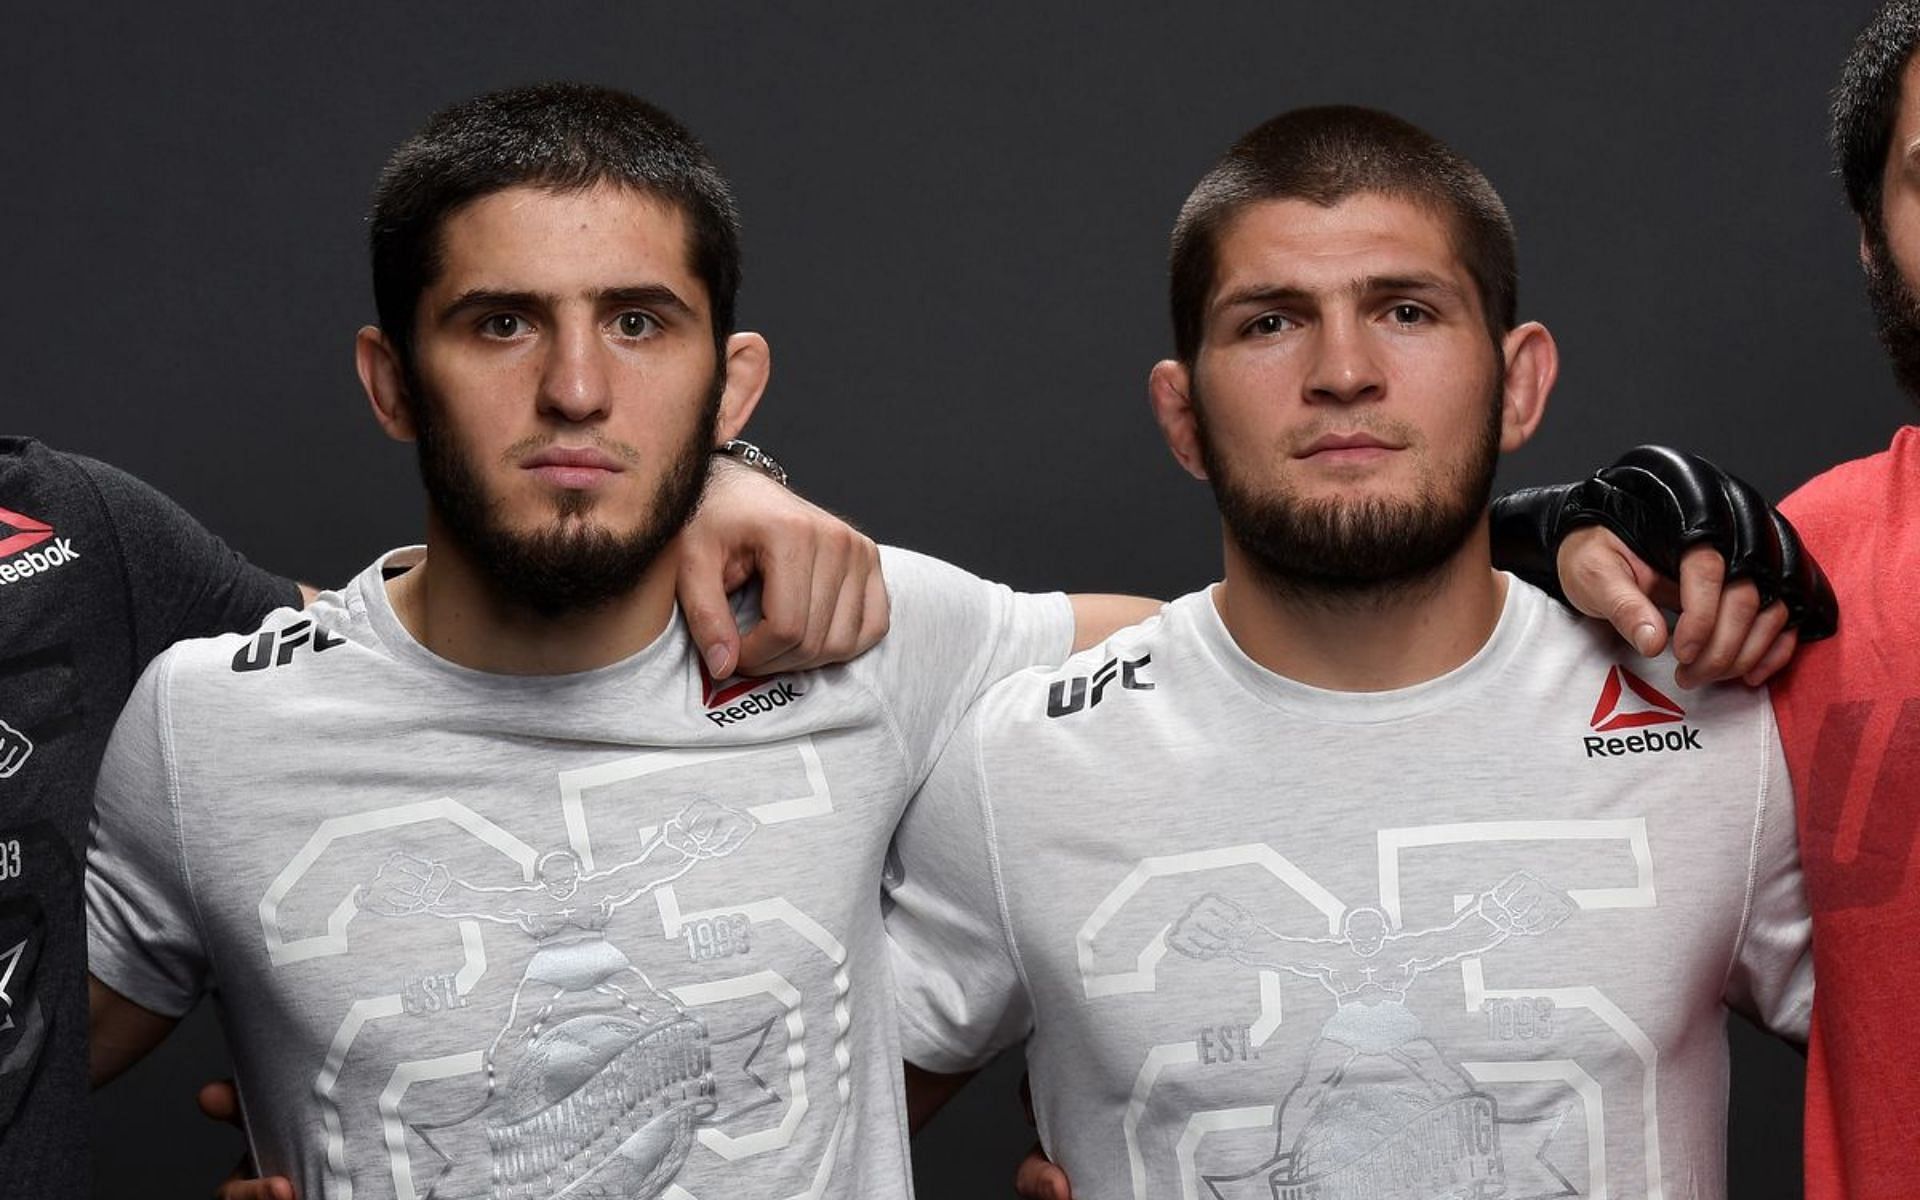 Are comparisons between Islam Makhachev and Khabib Nurmagomedov fair to either man?